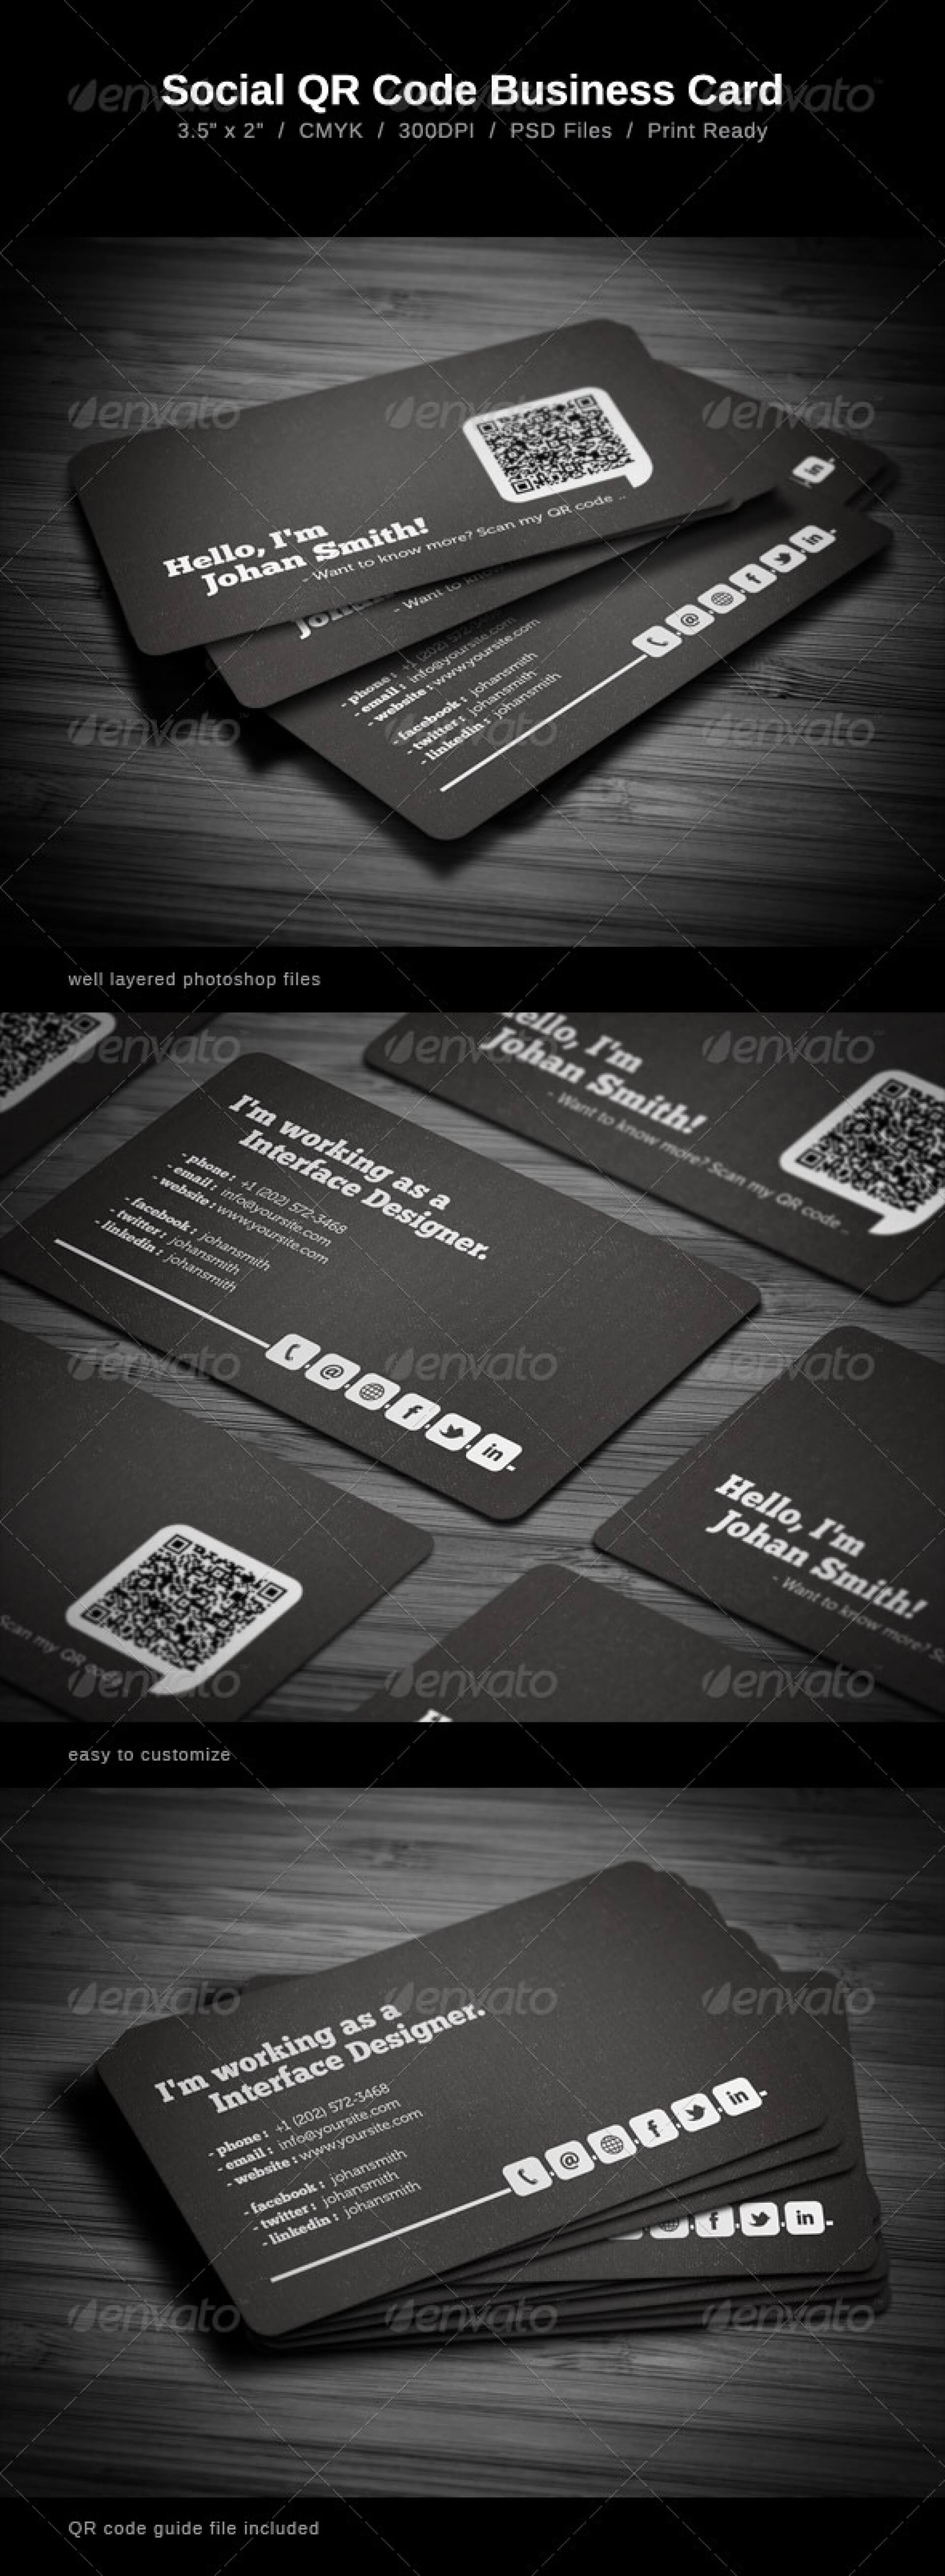 021 Social Qr Code Back Of Business Card Template Ideas Cool With Qr Code Business Card Template